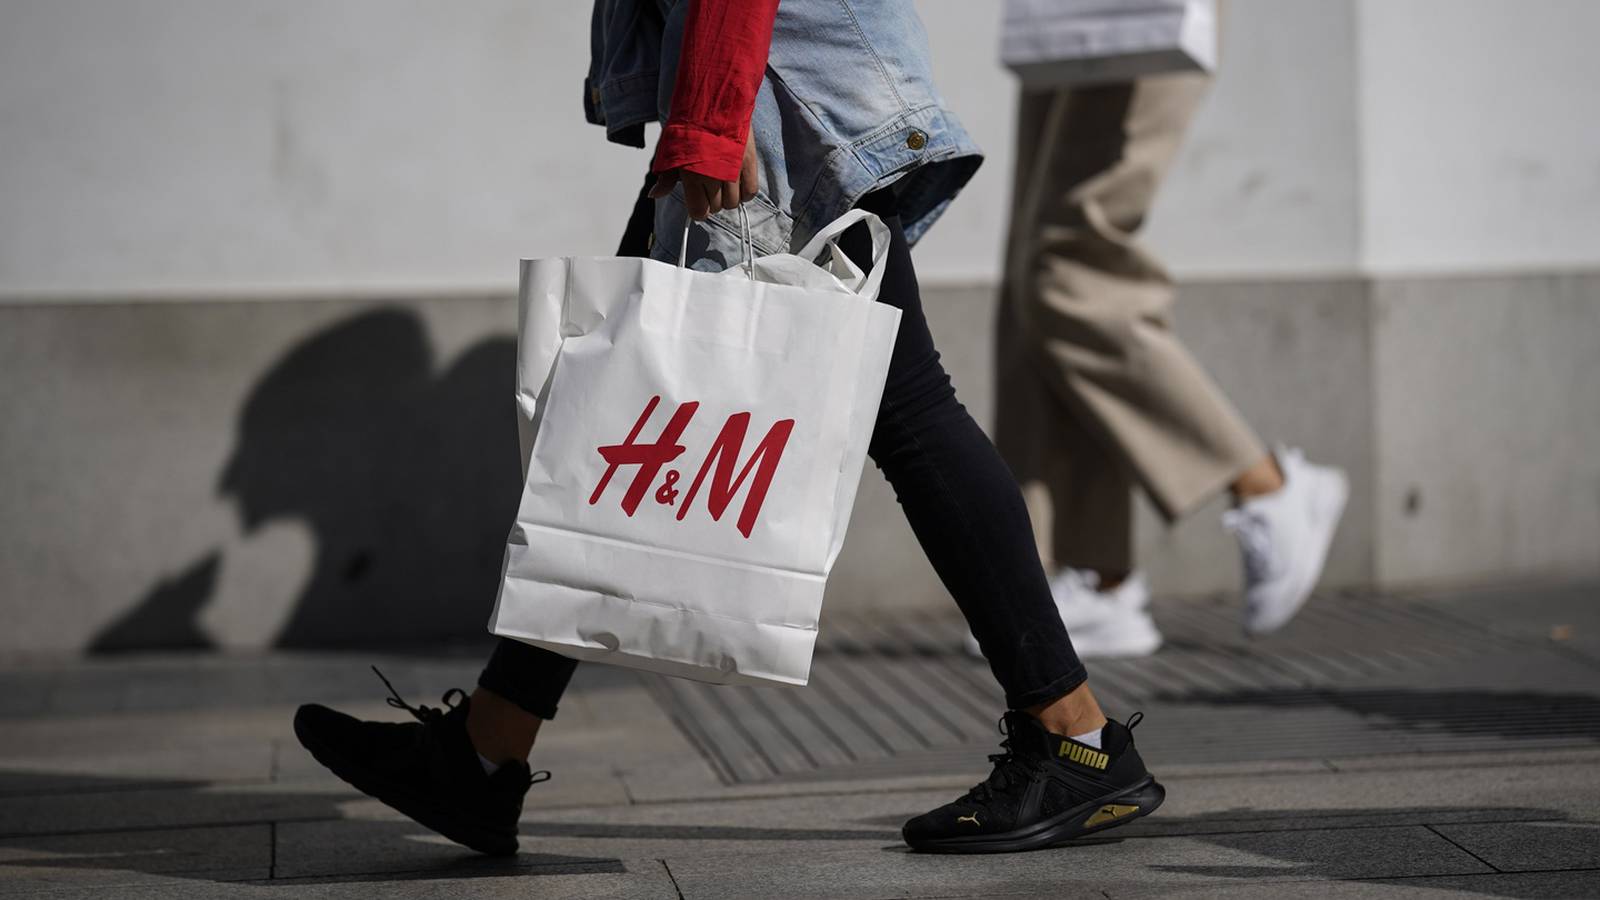 H&M to close hundreds of stores as online shift accelerates – The Irish ...